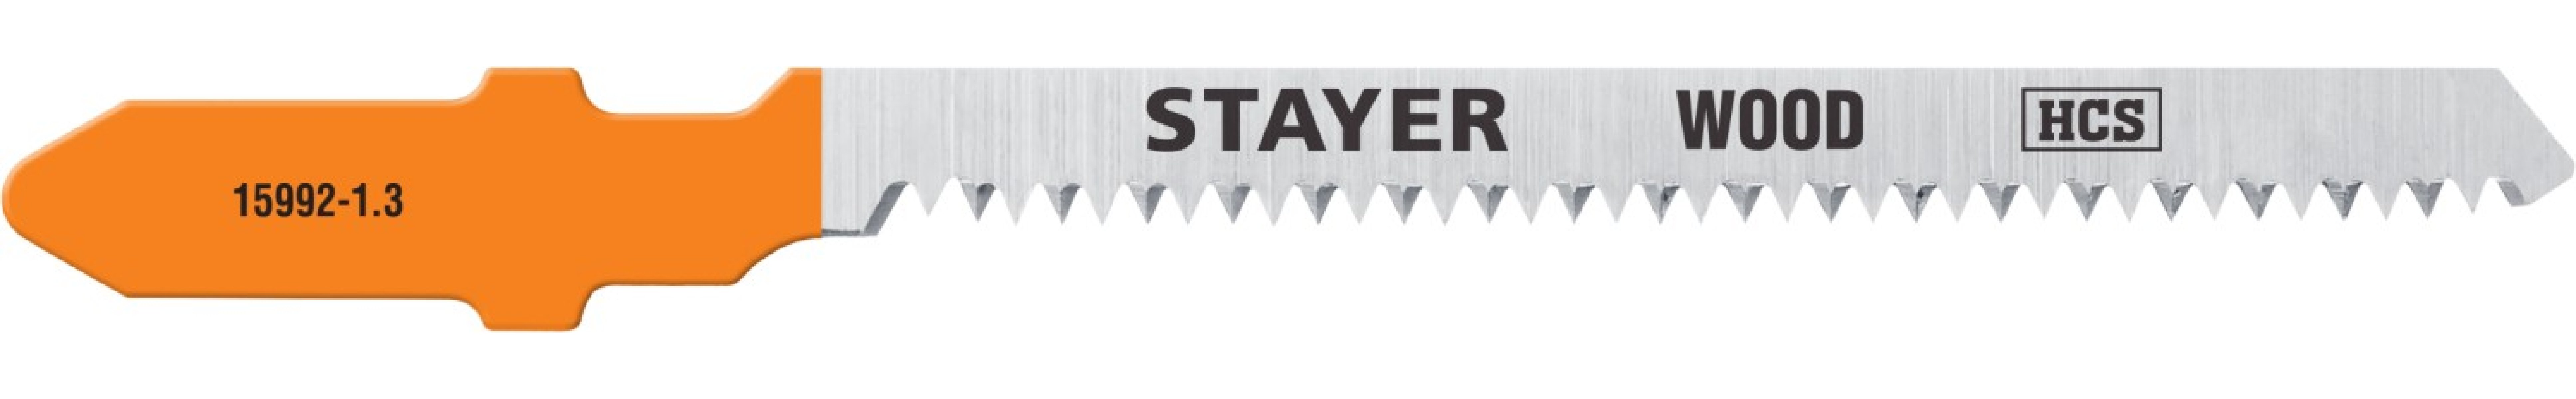 STAYER T101AO,   , HCS ,     , -,   1,4, .  50, 2,Professional, (15992-1.3_z02)